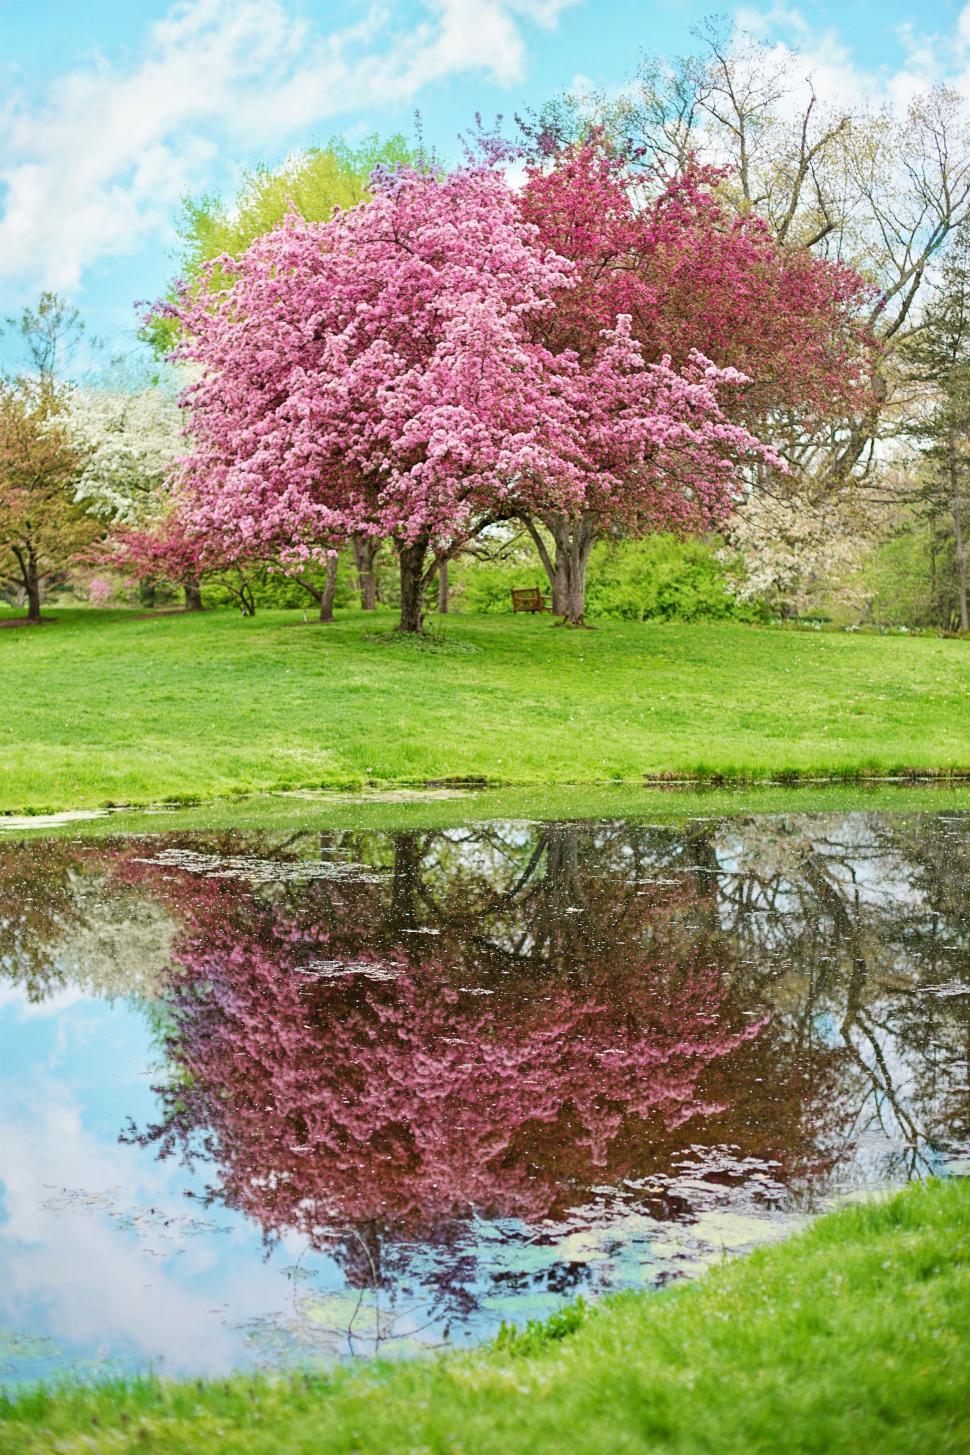 Free Image of Pink Flower Tree and Green Grass 